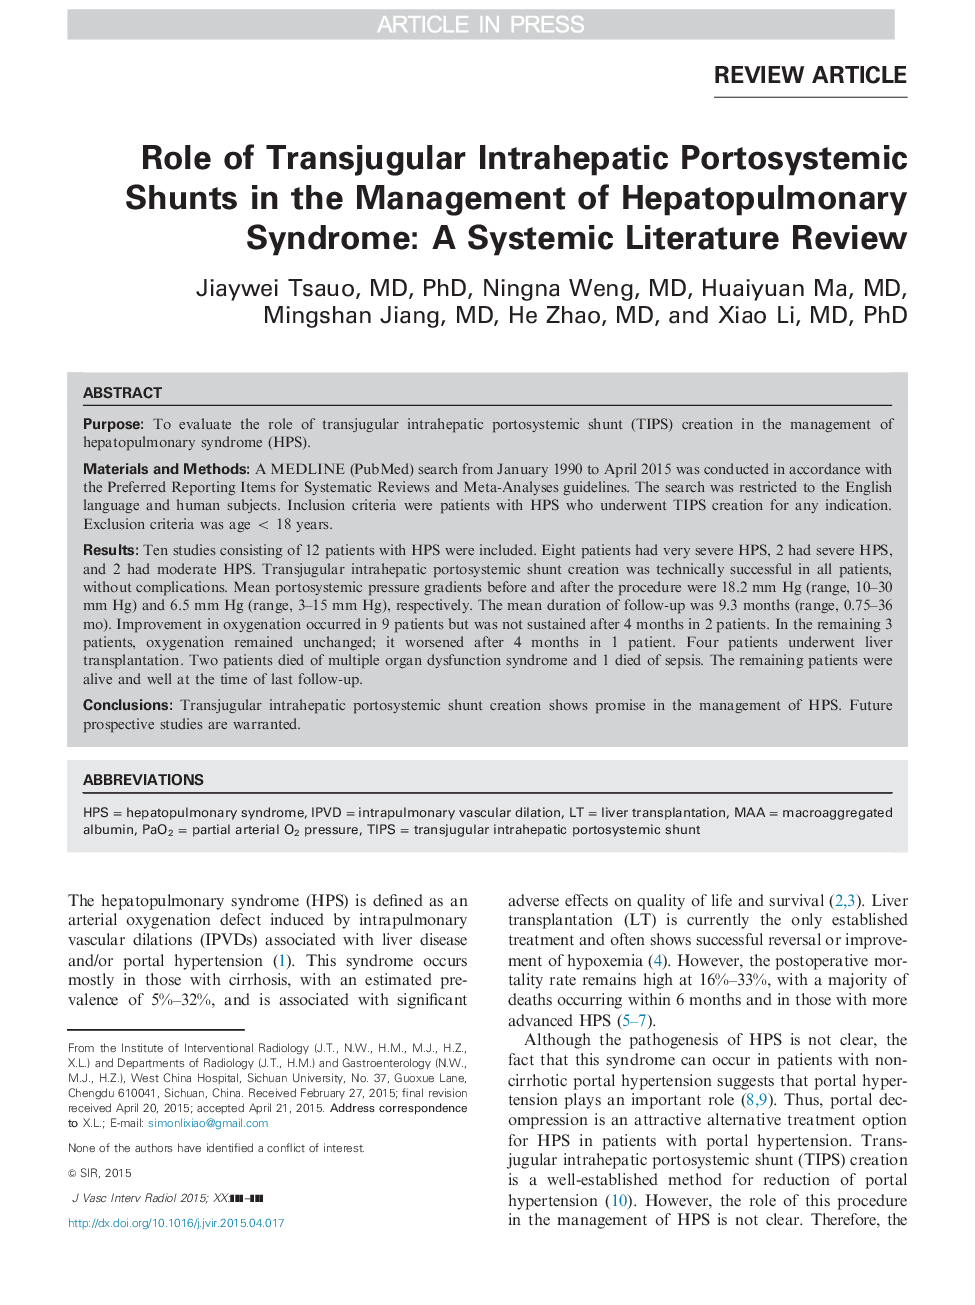 Role of Transjugular Intrahepatic Portosystemic Shunts in the Management of Hepatopulmonary Syndrome: A Systemic Literature Review